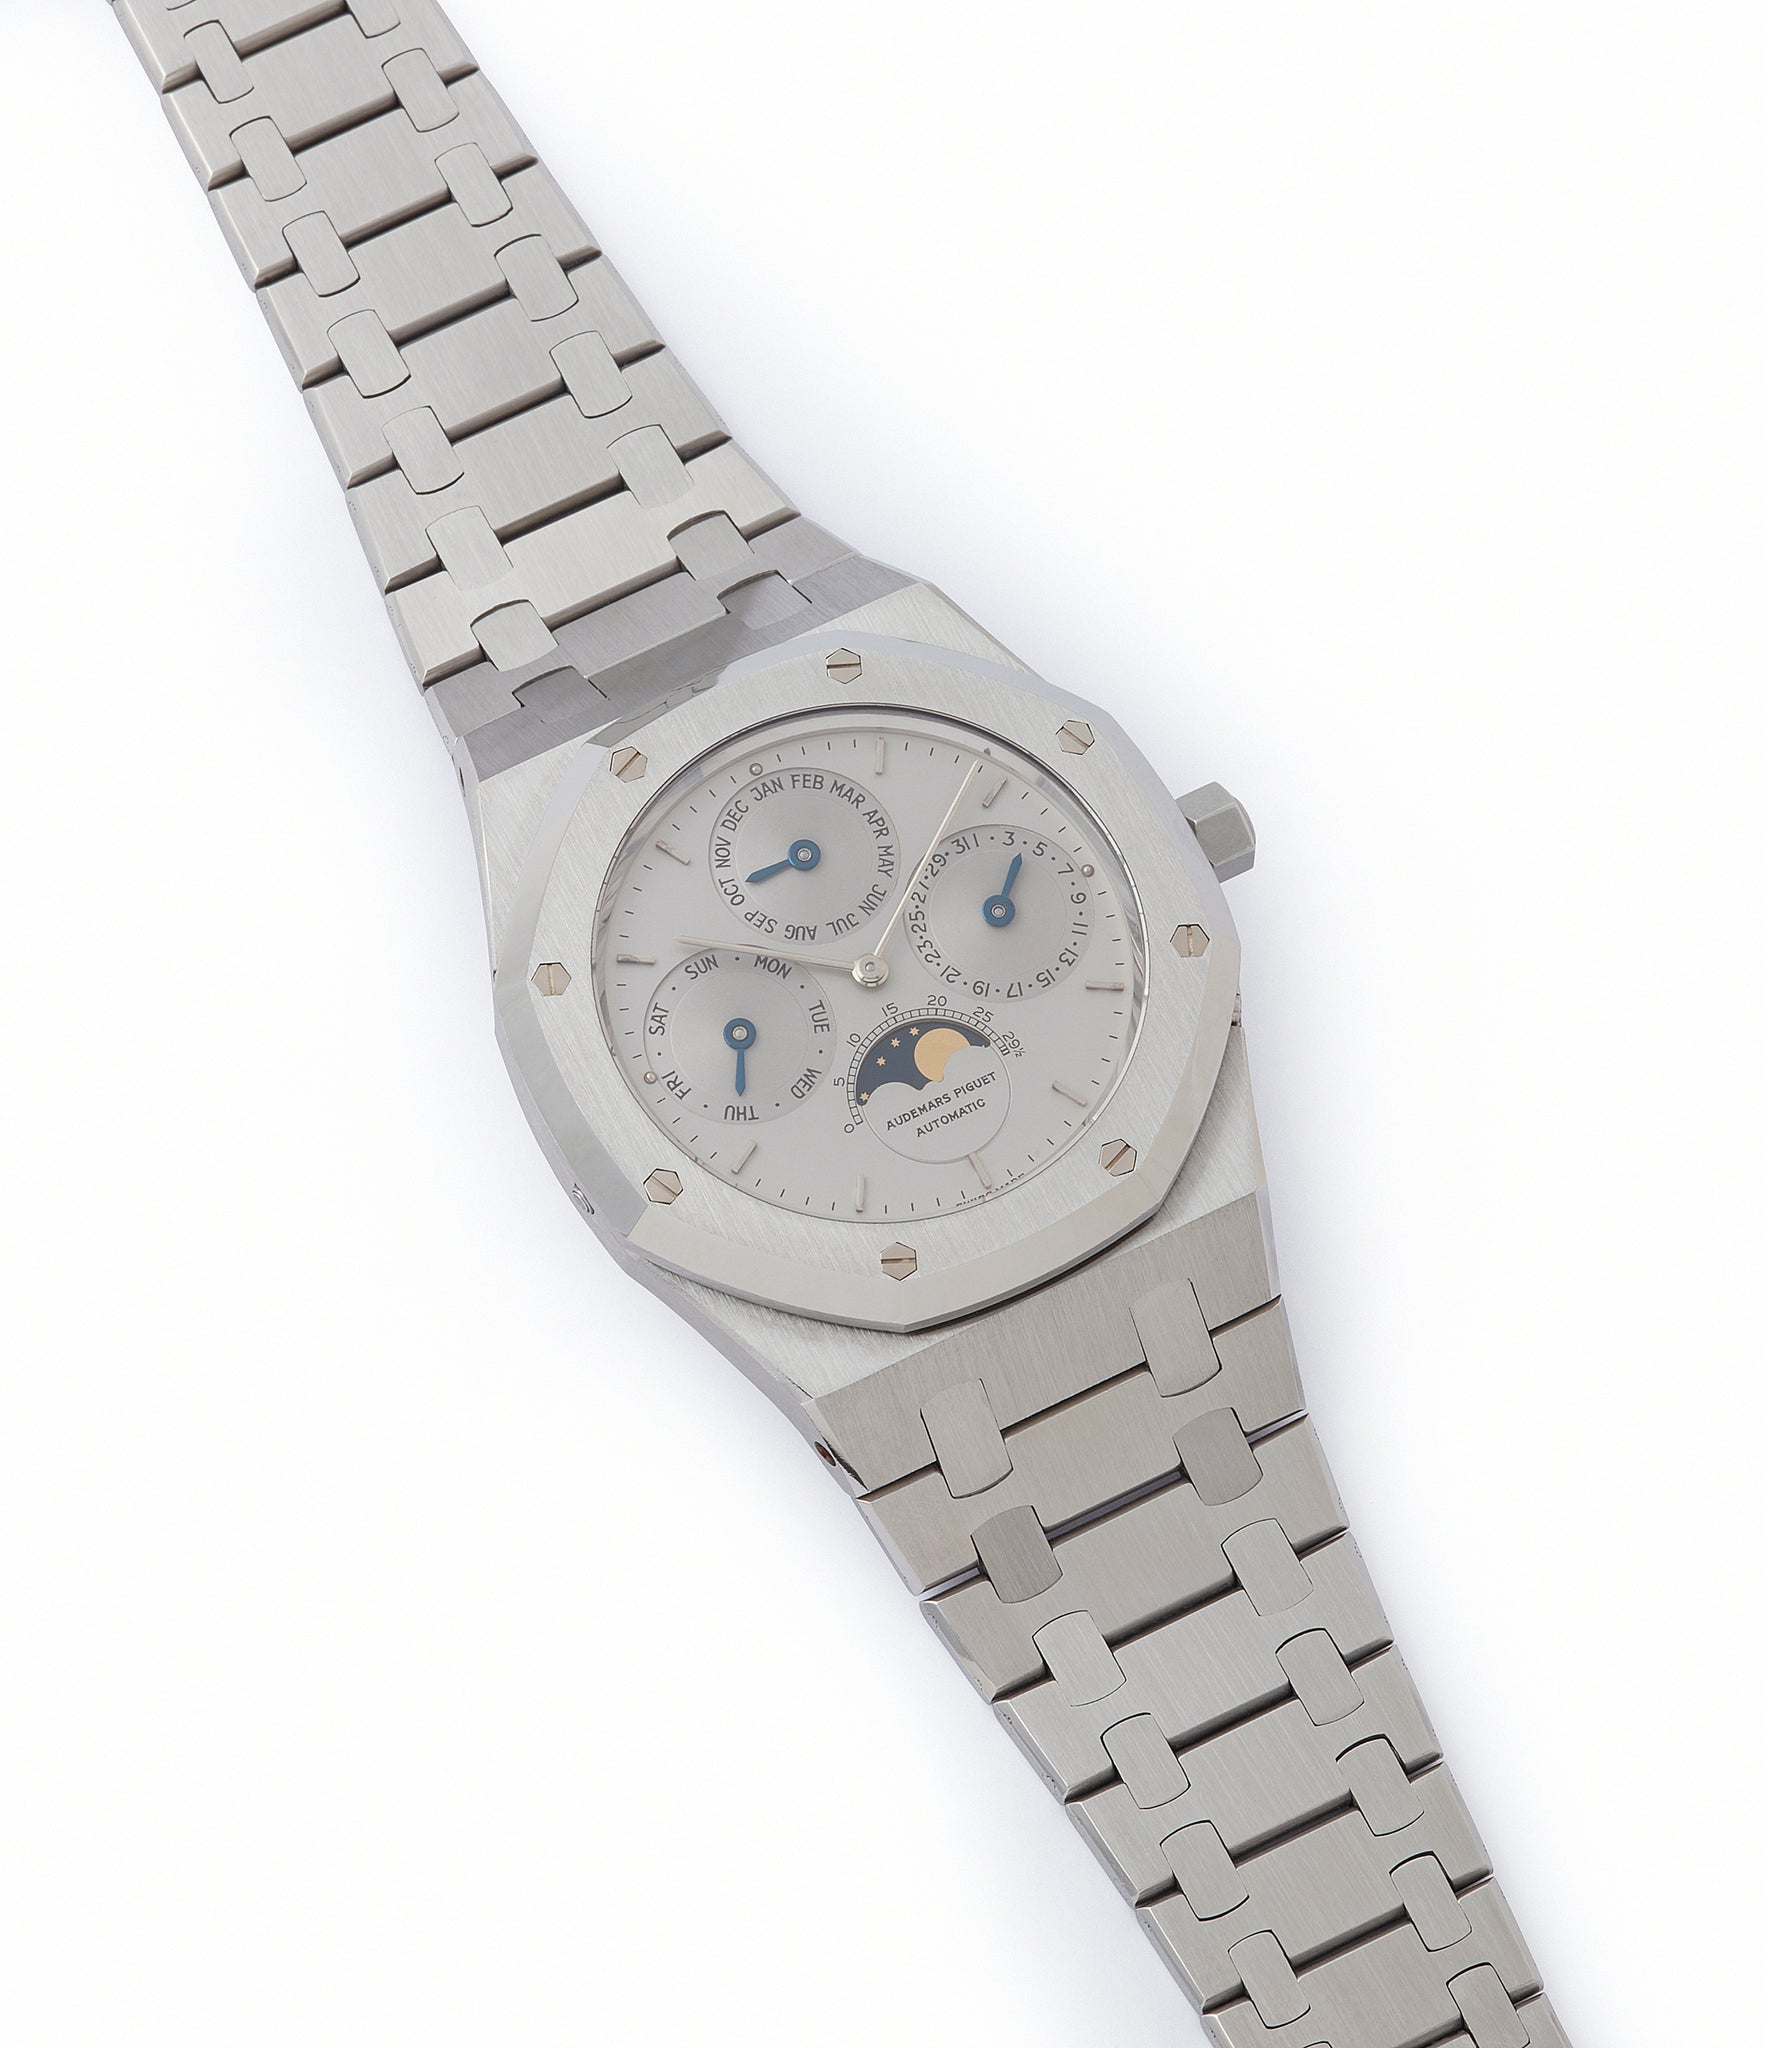 buying Audemars Piguet Royal Oak Perpetual Calendar 25654ST steel vintage watch for sale online at A Collected Man London UK specialist of rare watches